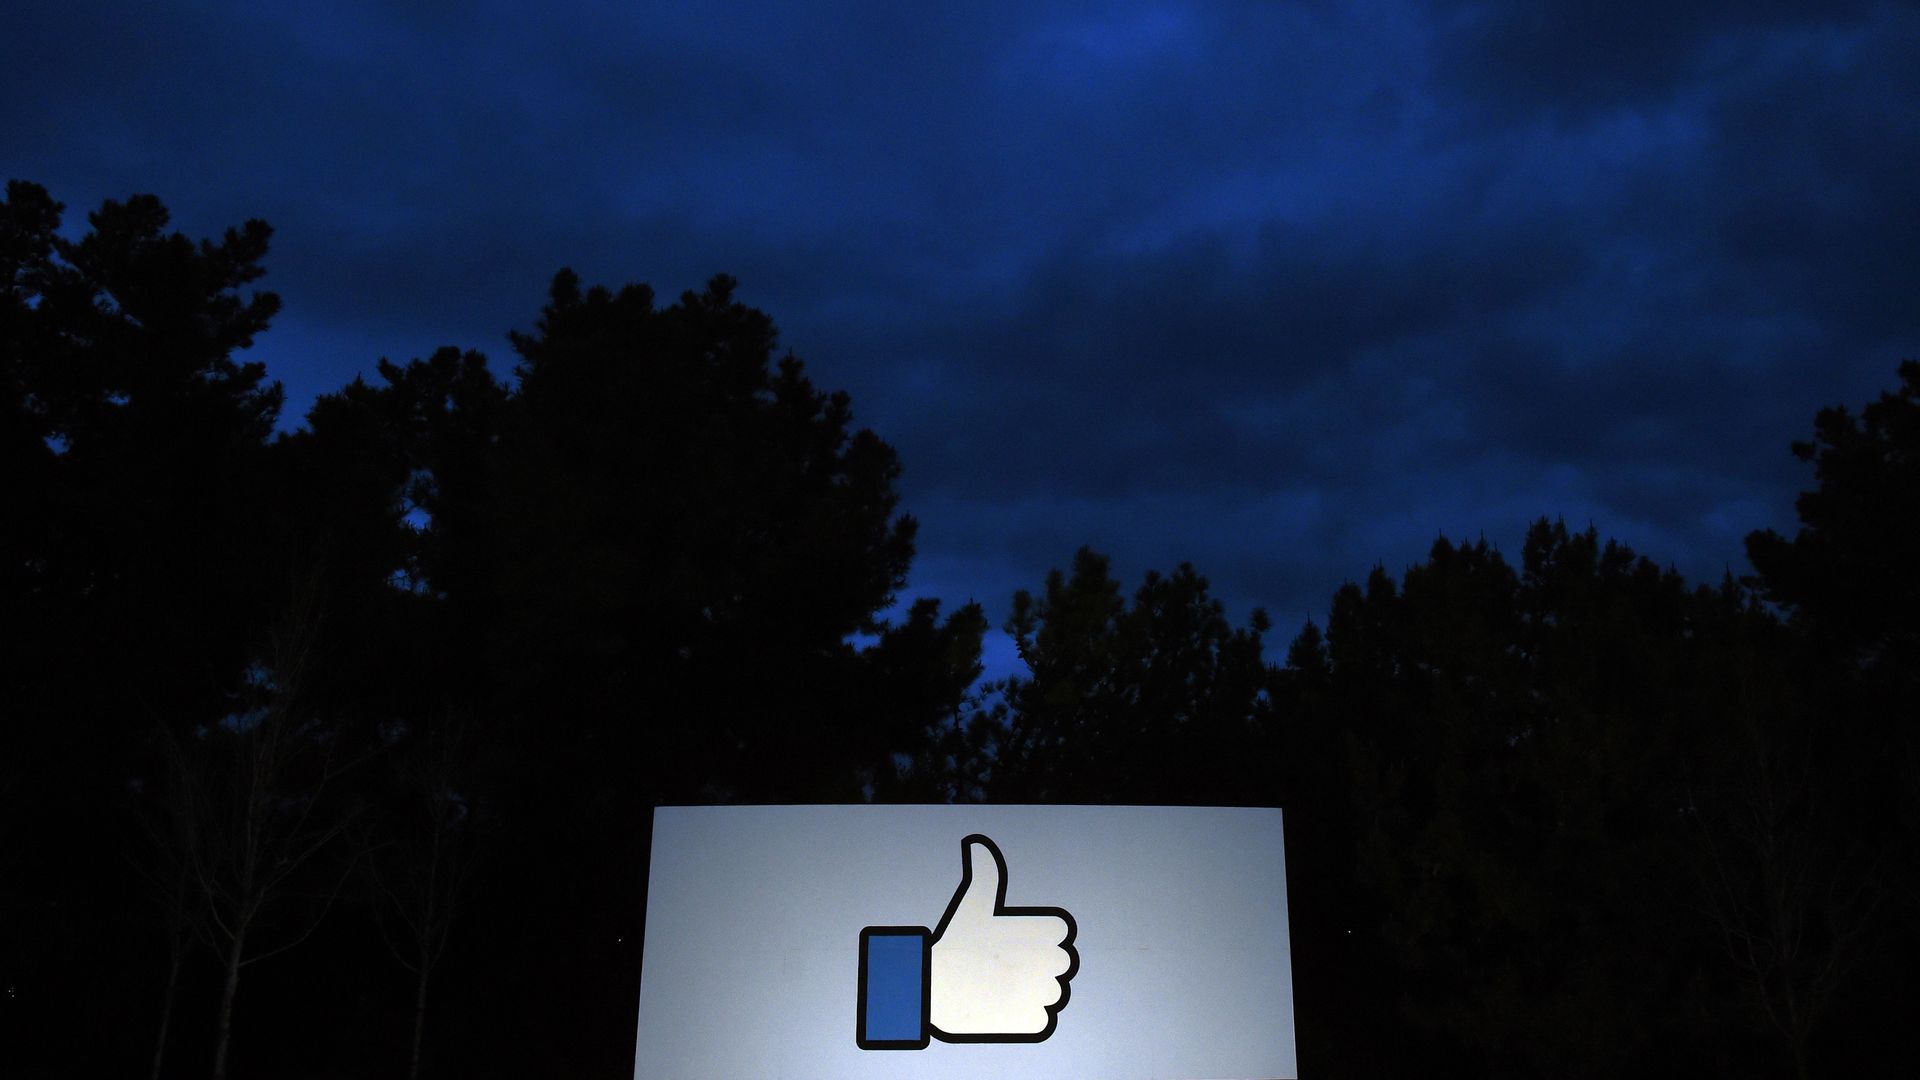 The Facebook "thumbs up" sign outside its office framed against a night sky